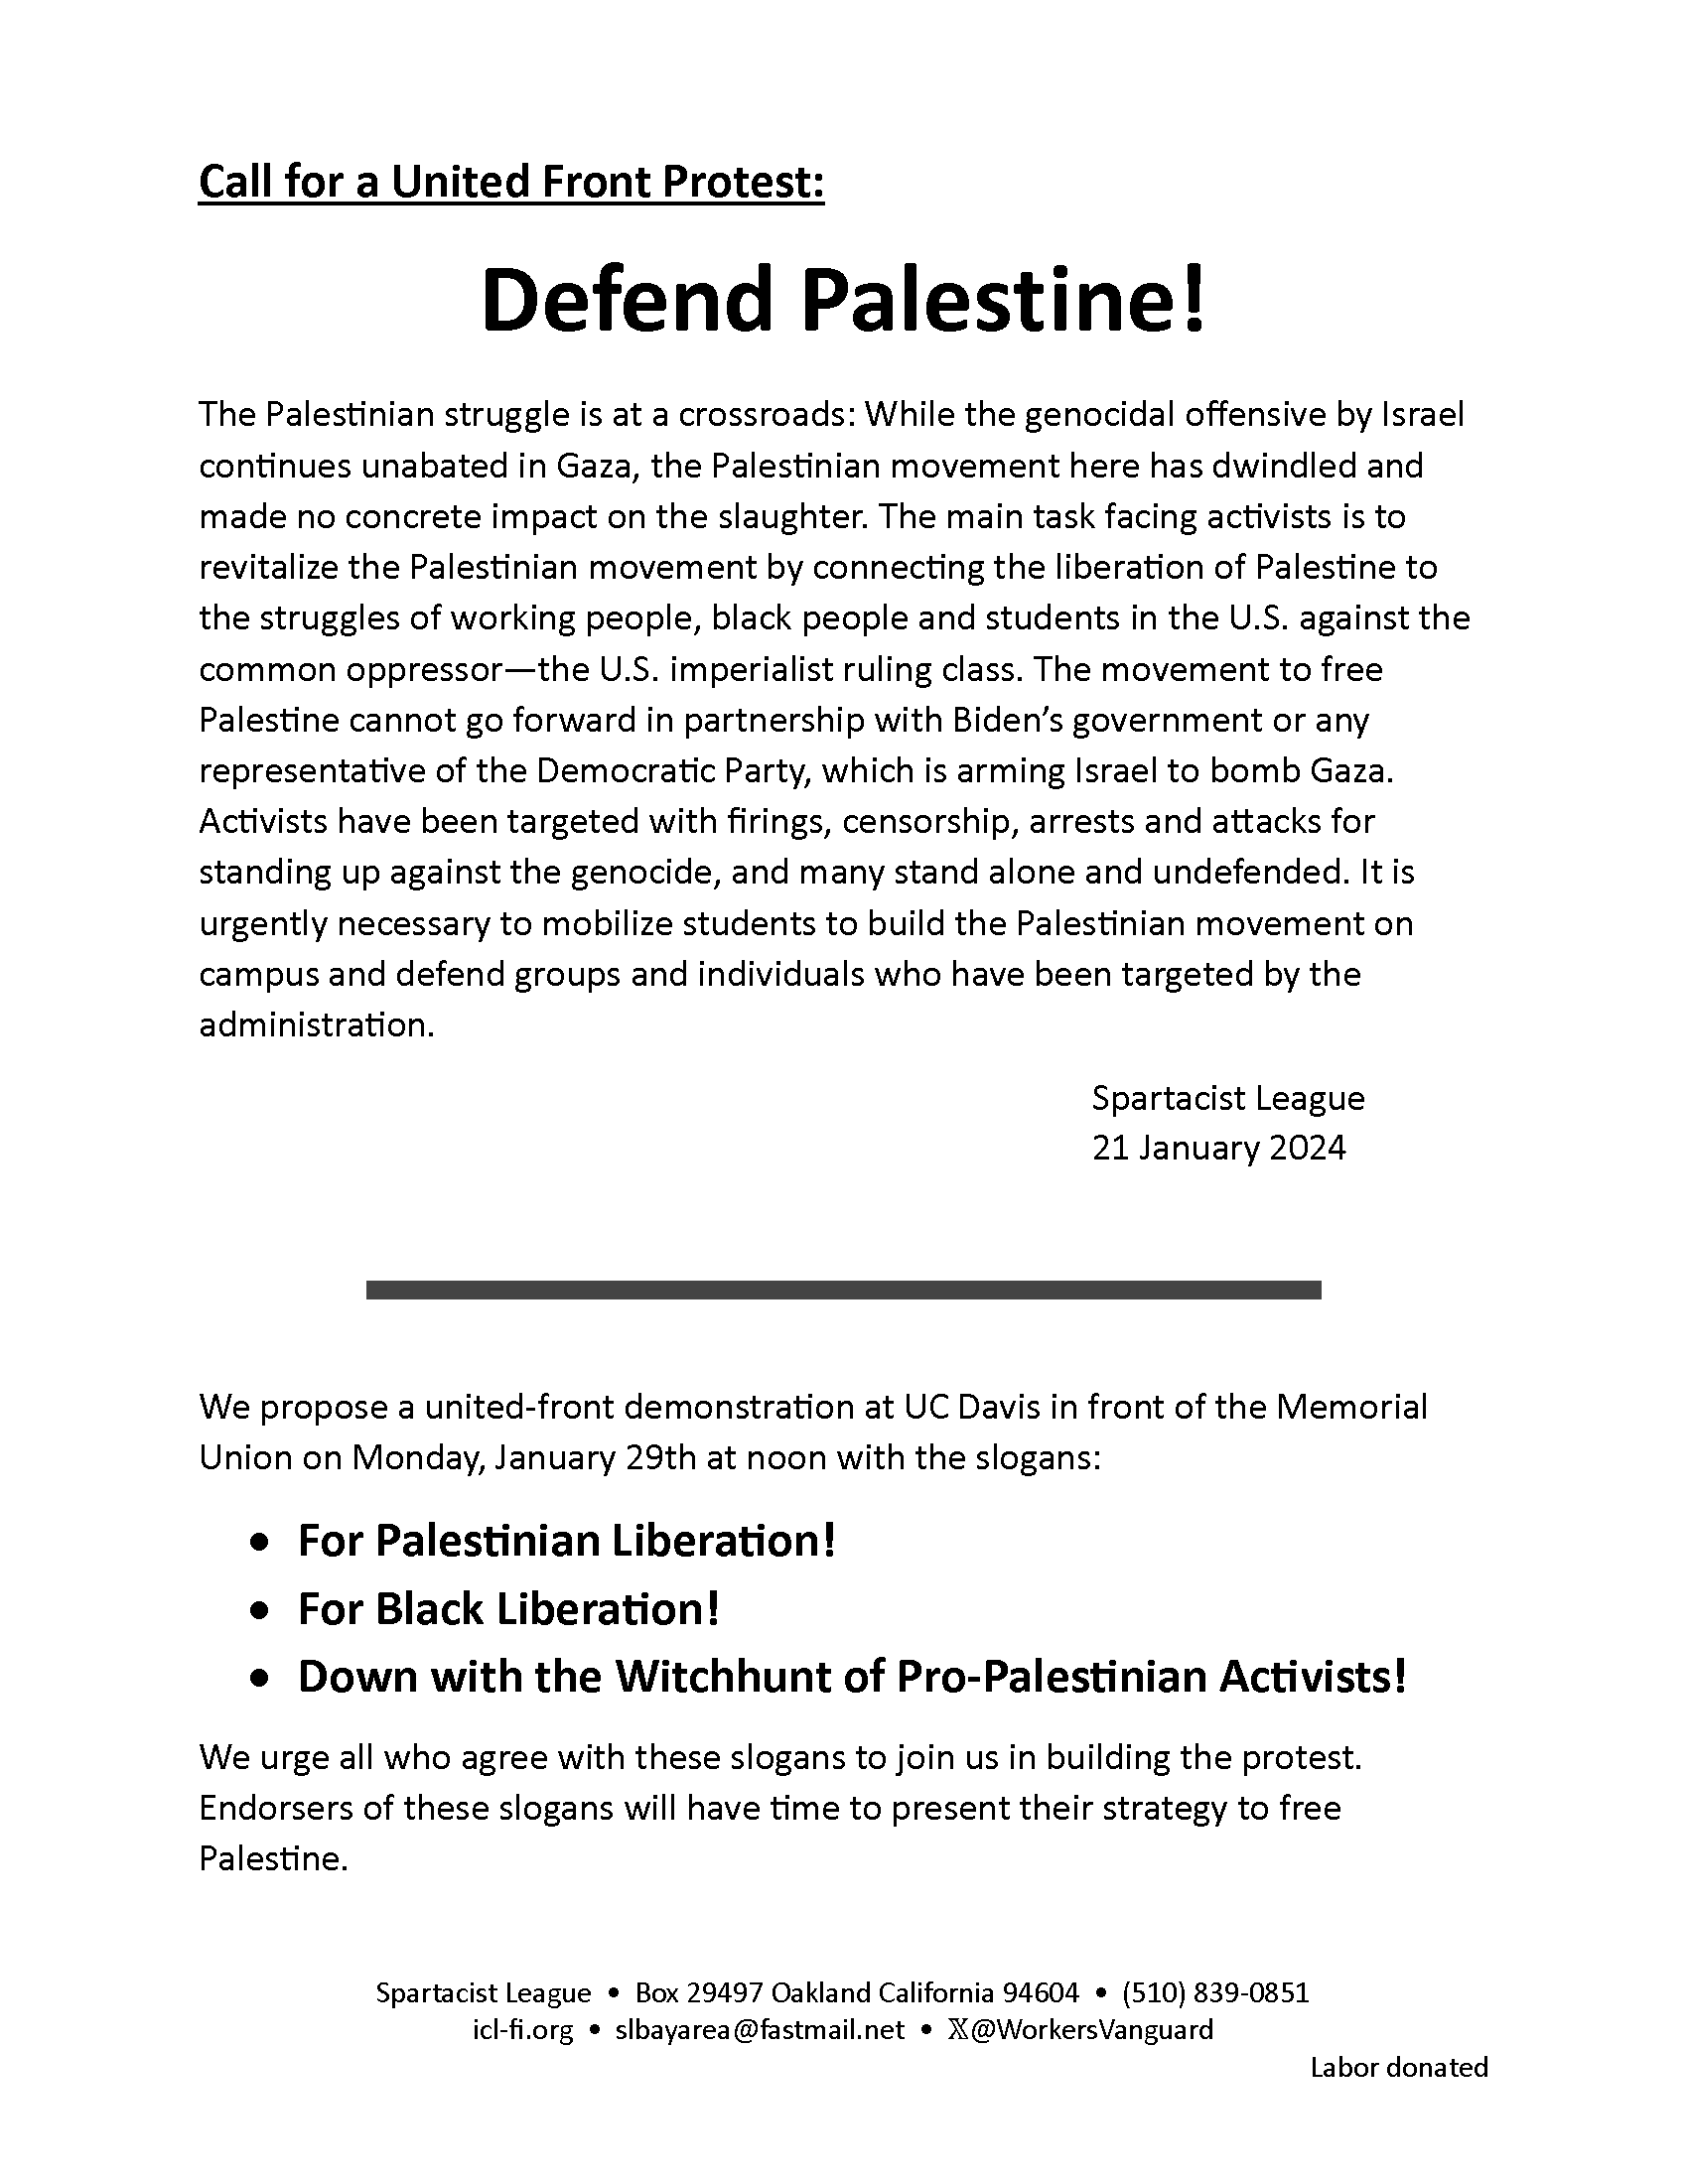 Call for a United Front Protest: Defend Palestine!